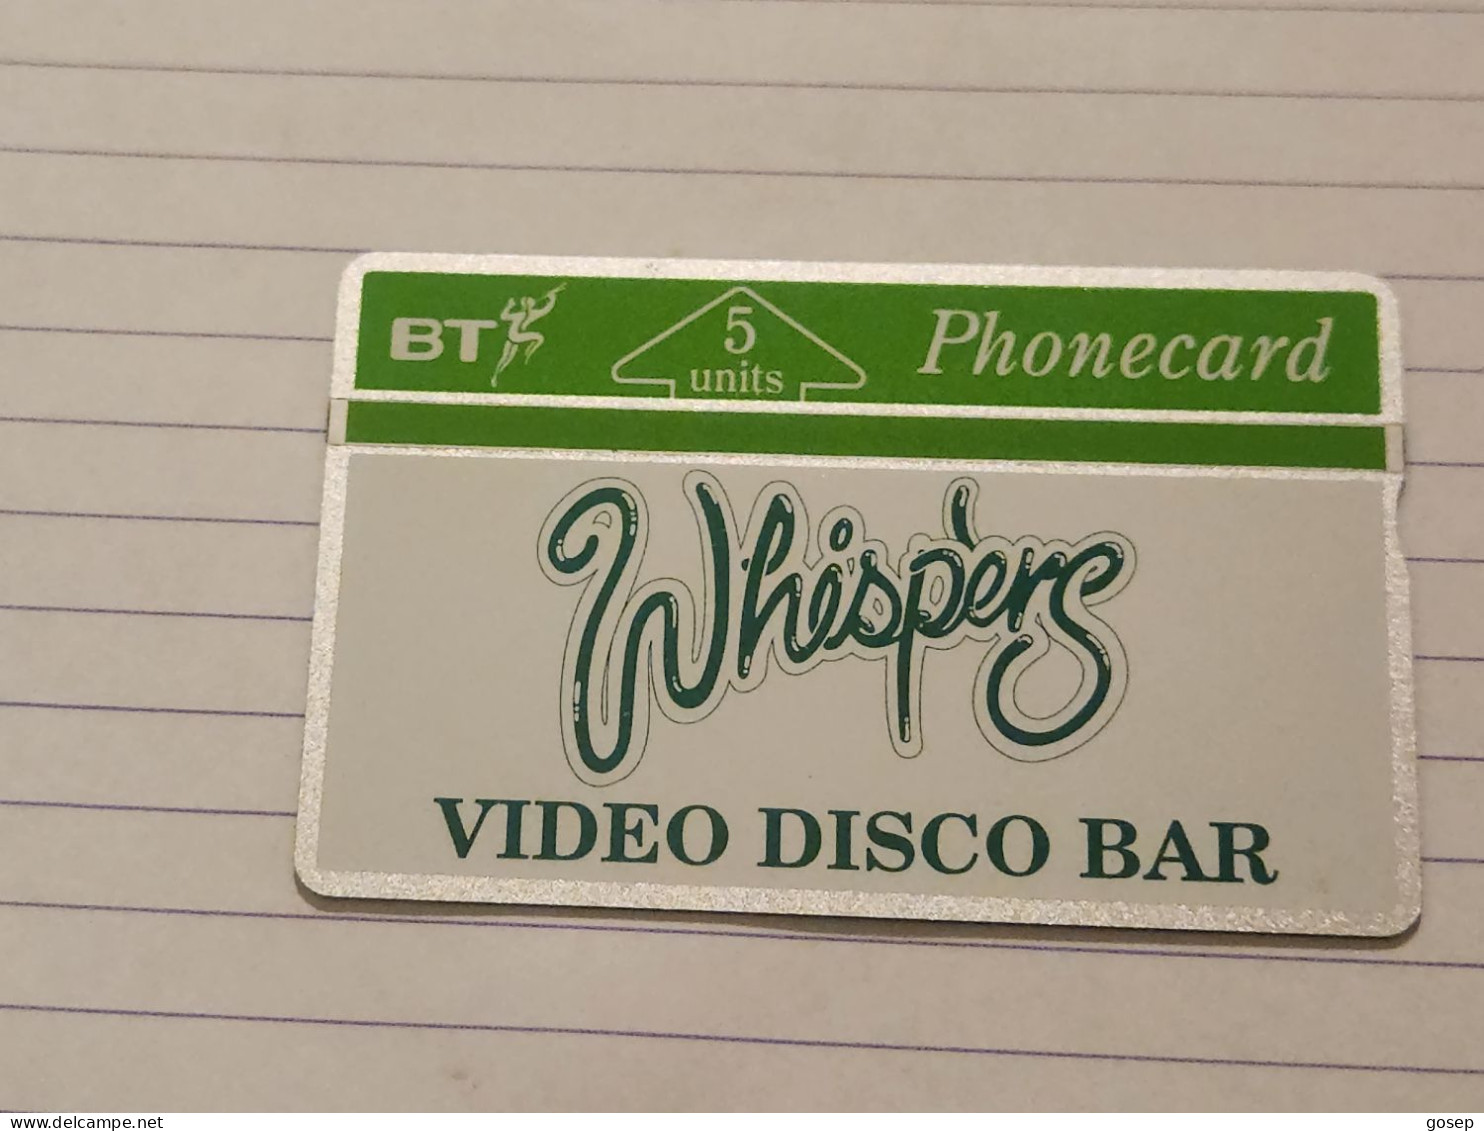 United Kingdom-(BTG-024)-whispers Video Disco Bar-(38)(5units)(201H10358)(tirage-500)(price Cataloge-8.00£mint) - BT General Issues